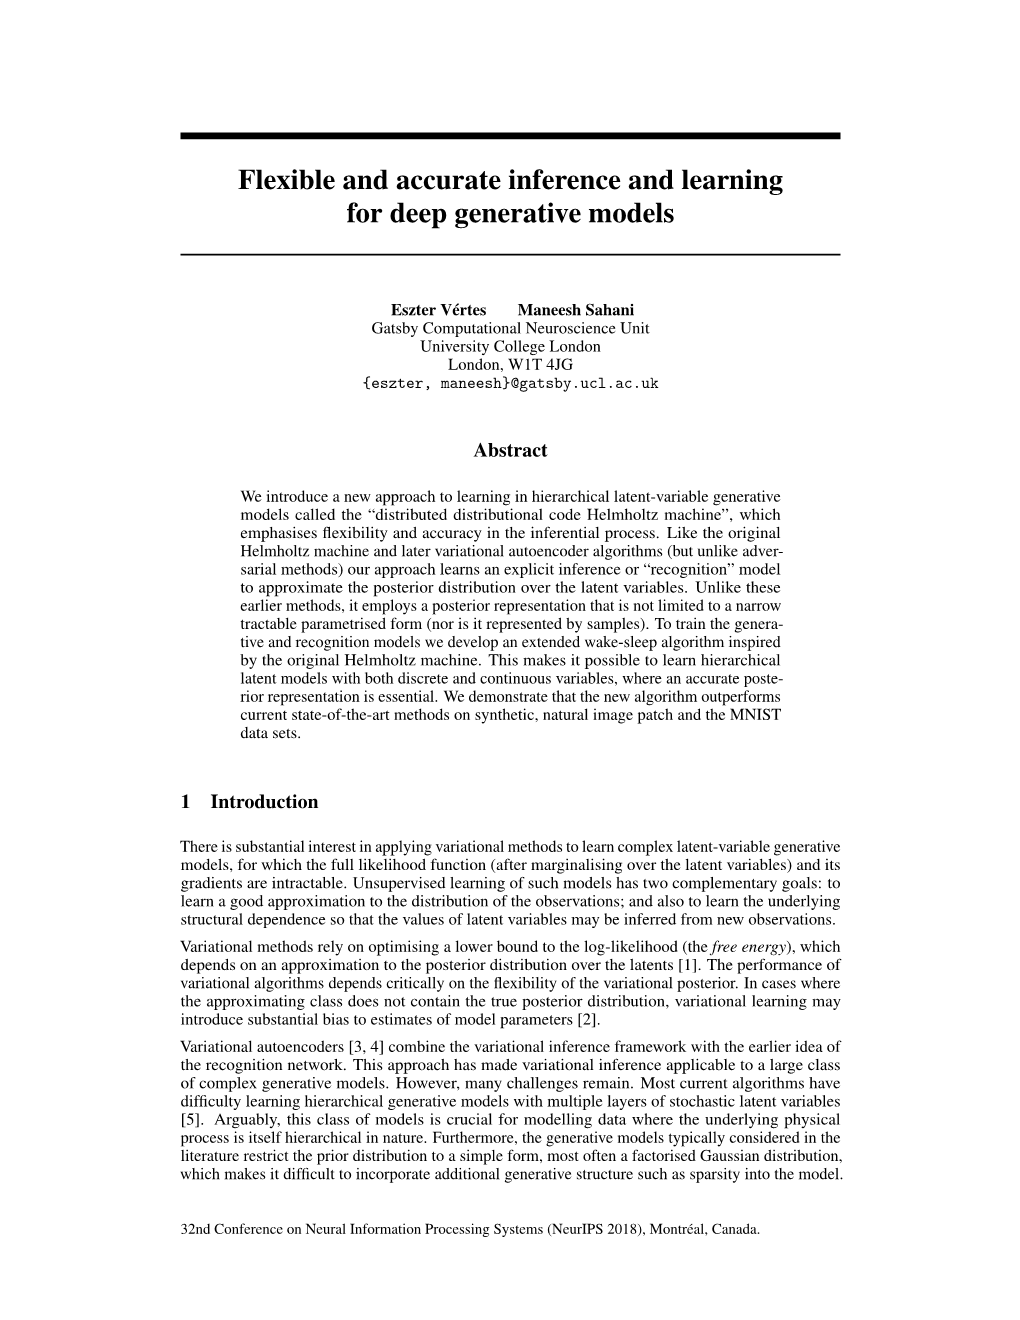 Flexible and Accurate Inference and Learning for Deep Generative Models